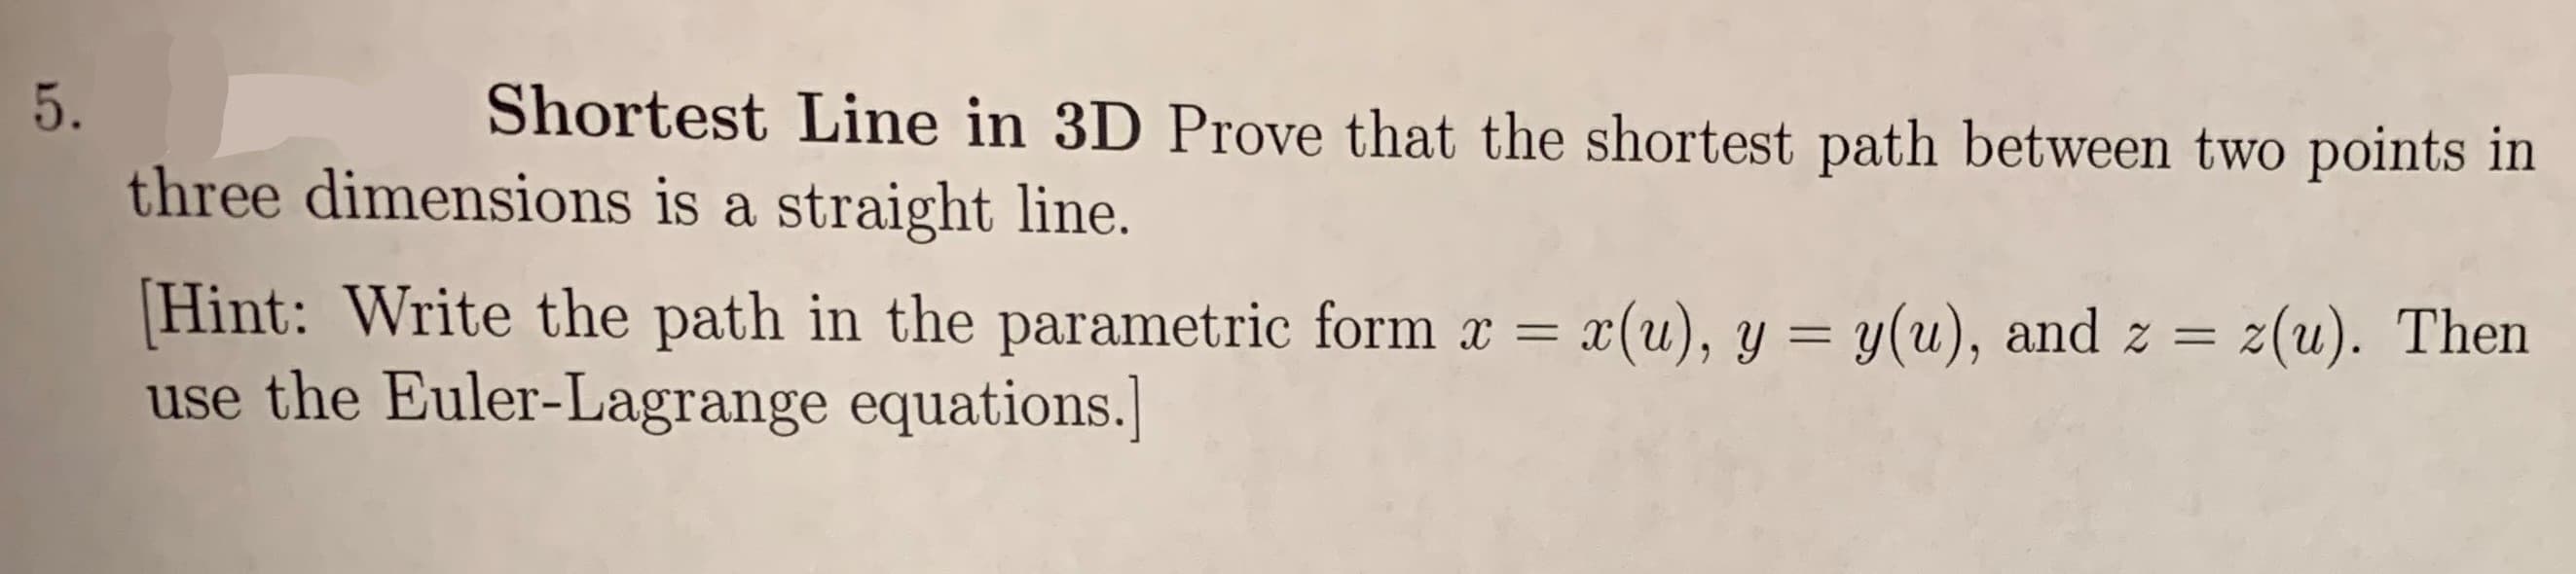 Shortest Line in 3D Prove that the shortest path between two points in
5.
three dimensions is a straight line.
Hint: Write the path in the parametric form x = x(u), y
use the Euler-Lagrange equations.
y(u), and z =
2(u). Then
